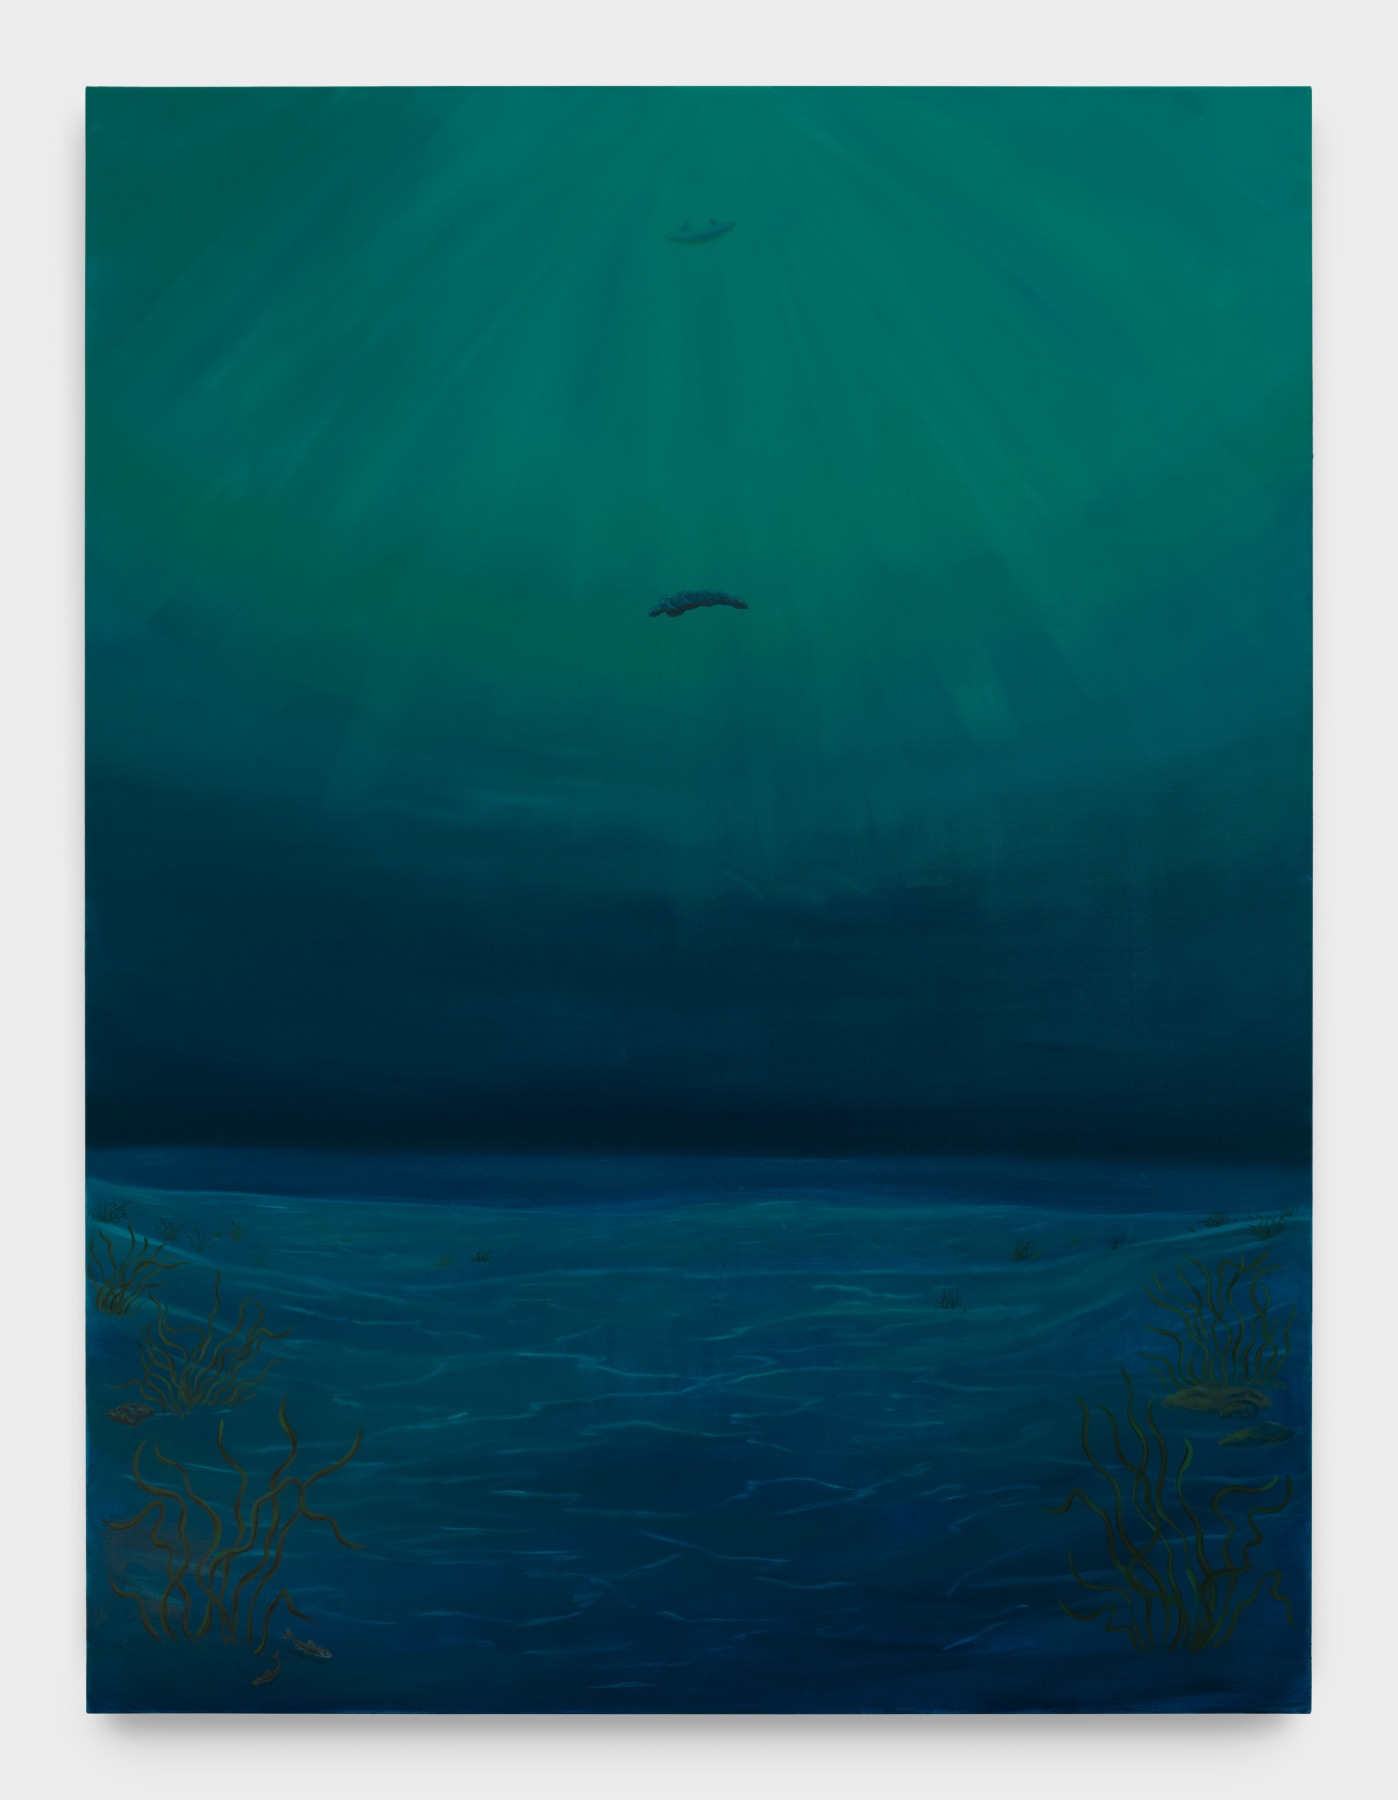 Bambou Gili's artwork "Earl's Descent". A wrapped lifeless body floats to the bottom of a lake. 96 x 72 in (243.8 x 182.9 cm) oil on linen, 2022